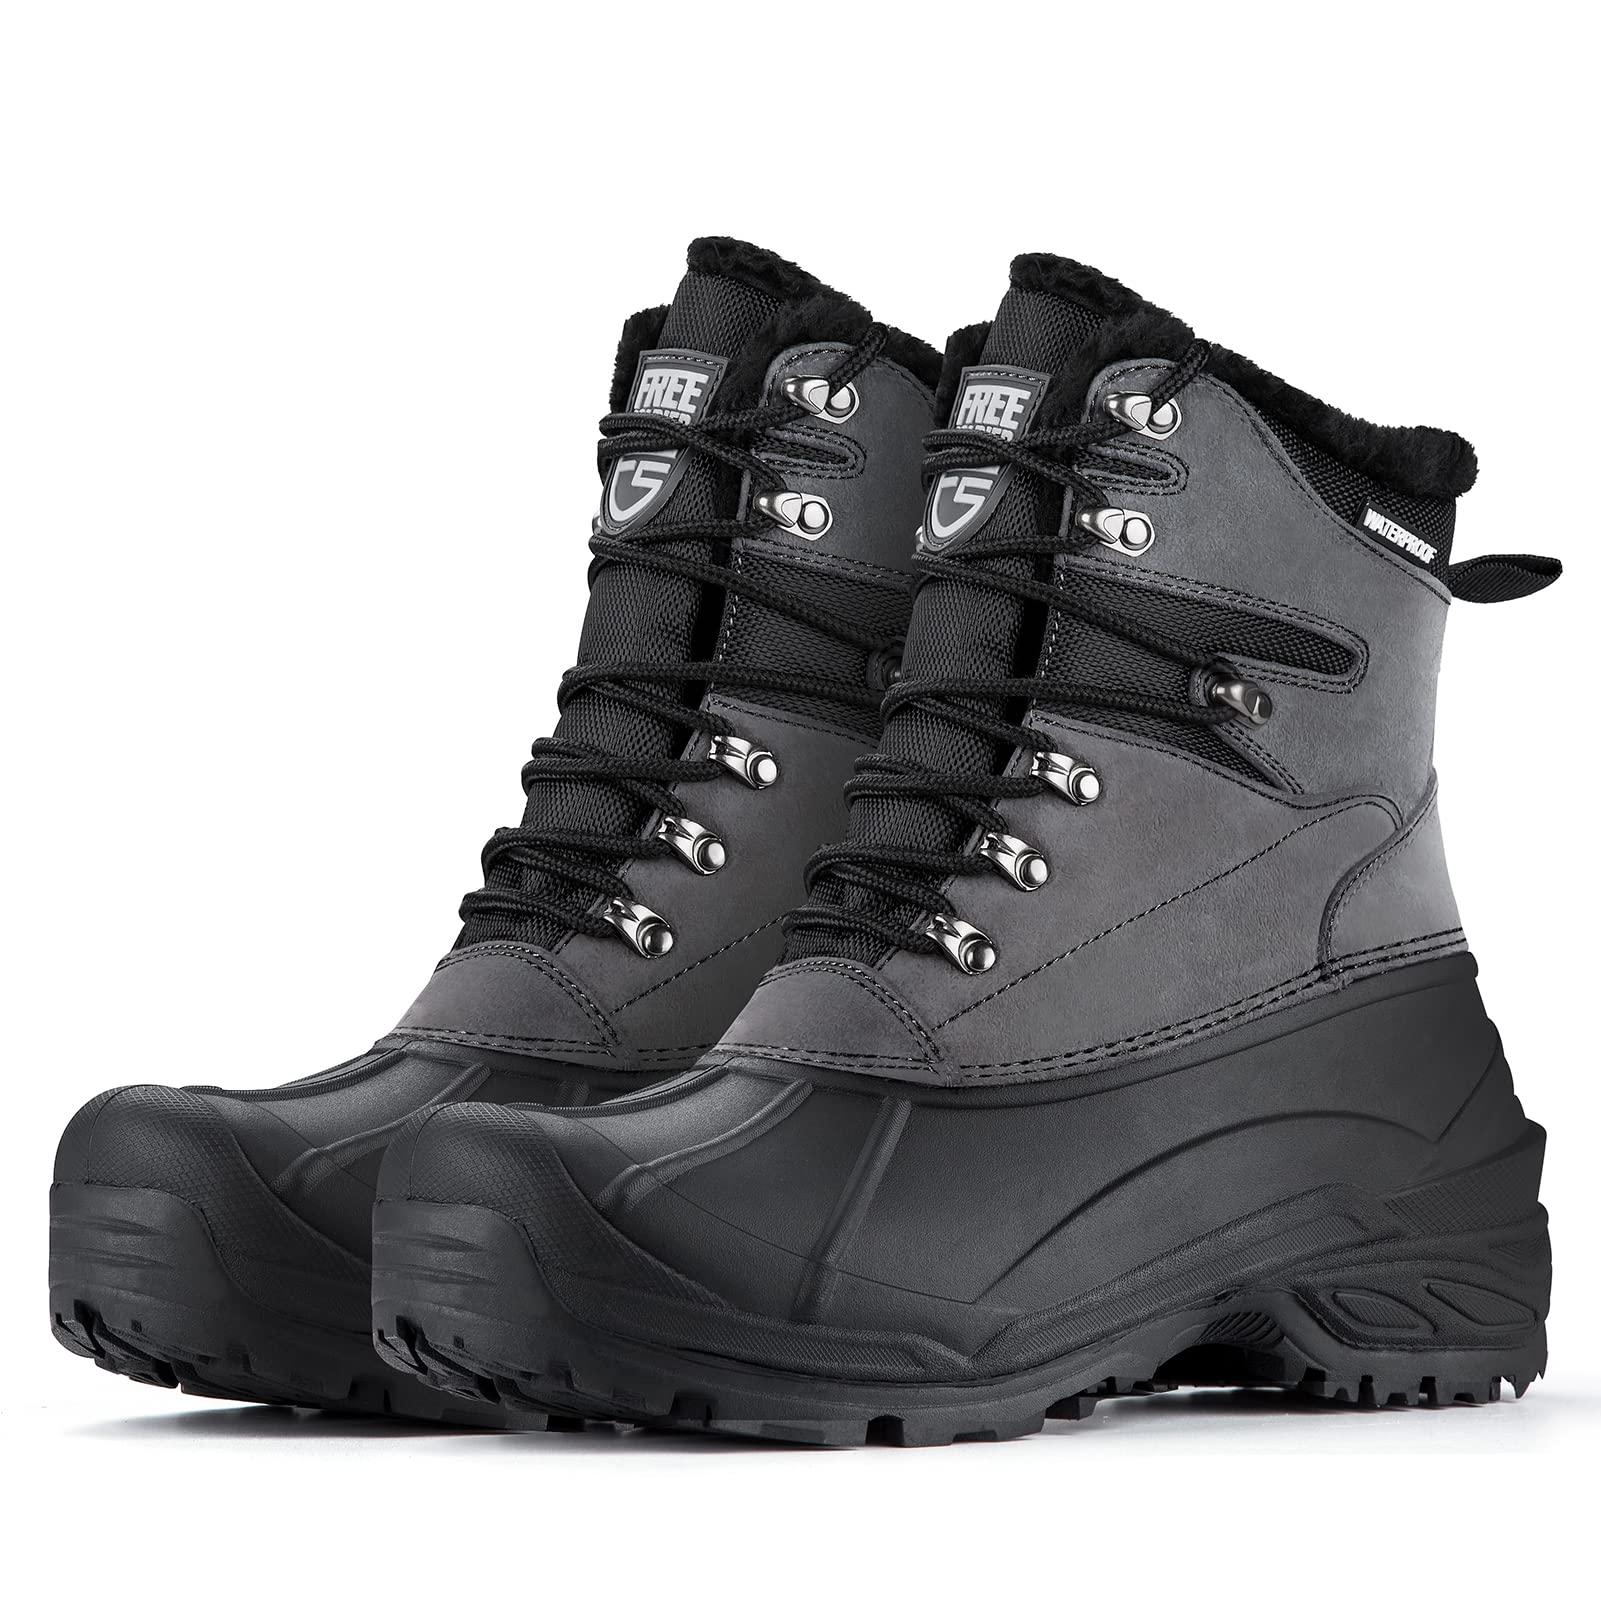 Insulated Waterproof Snow Hunting Boots